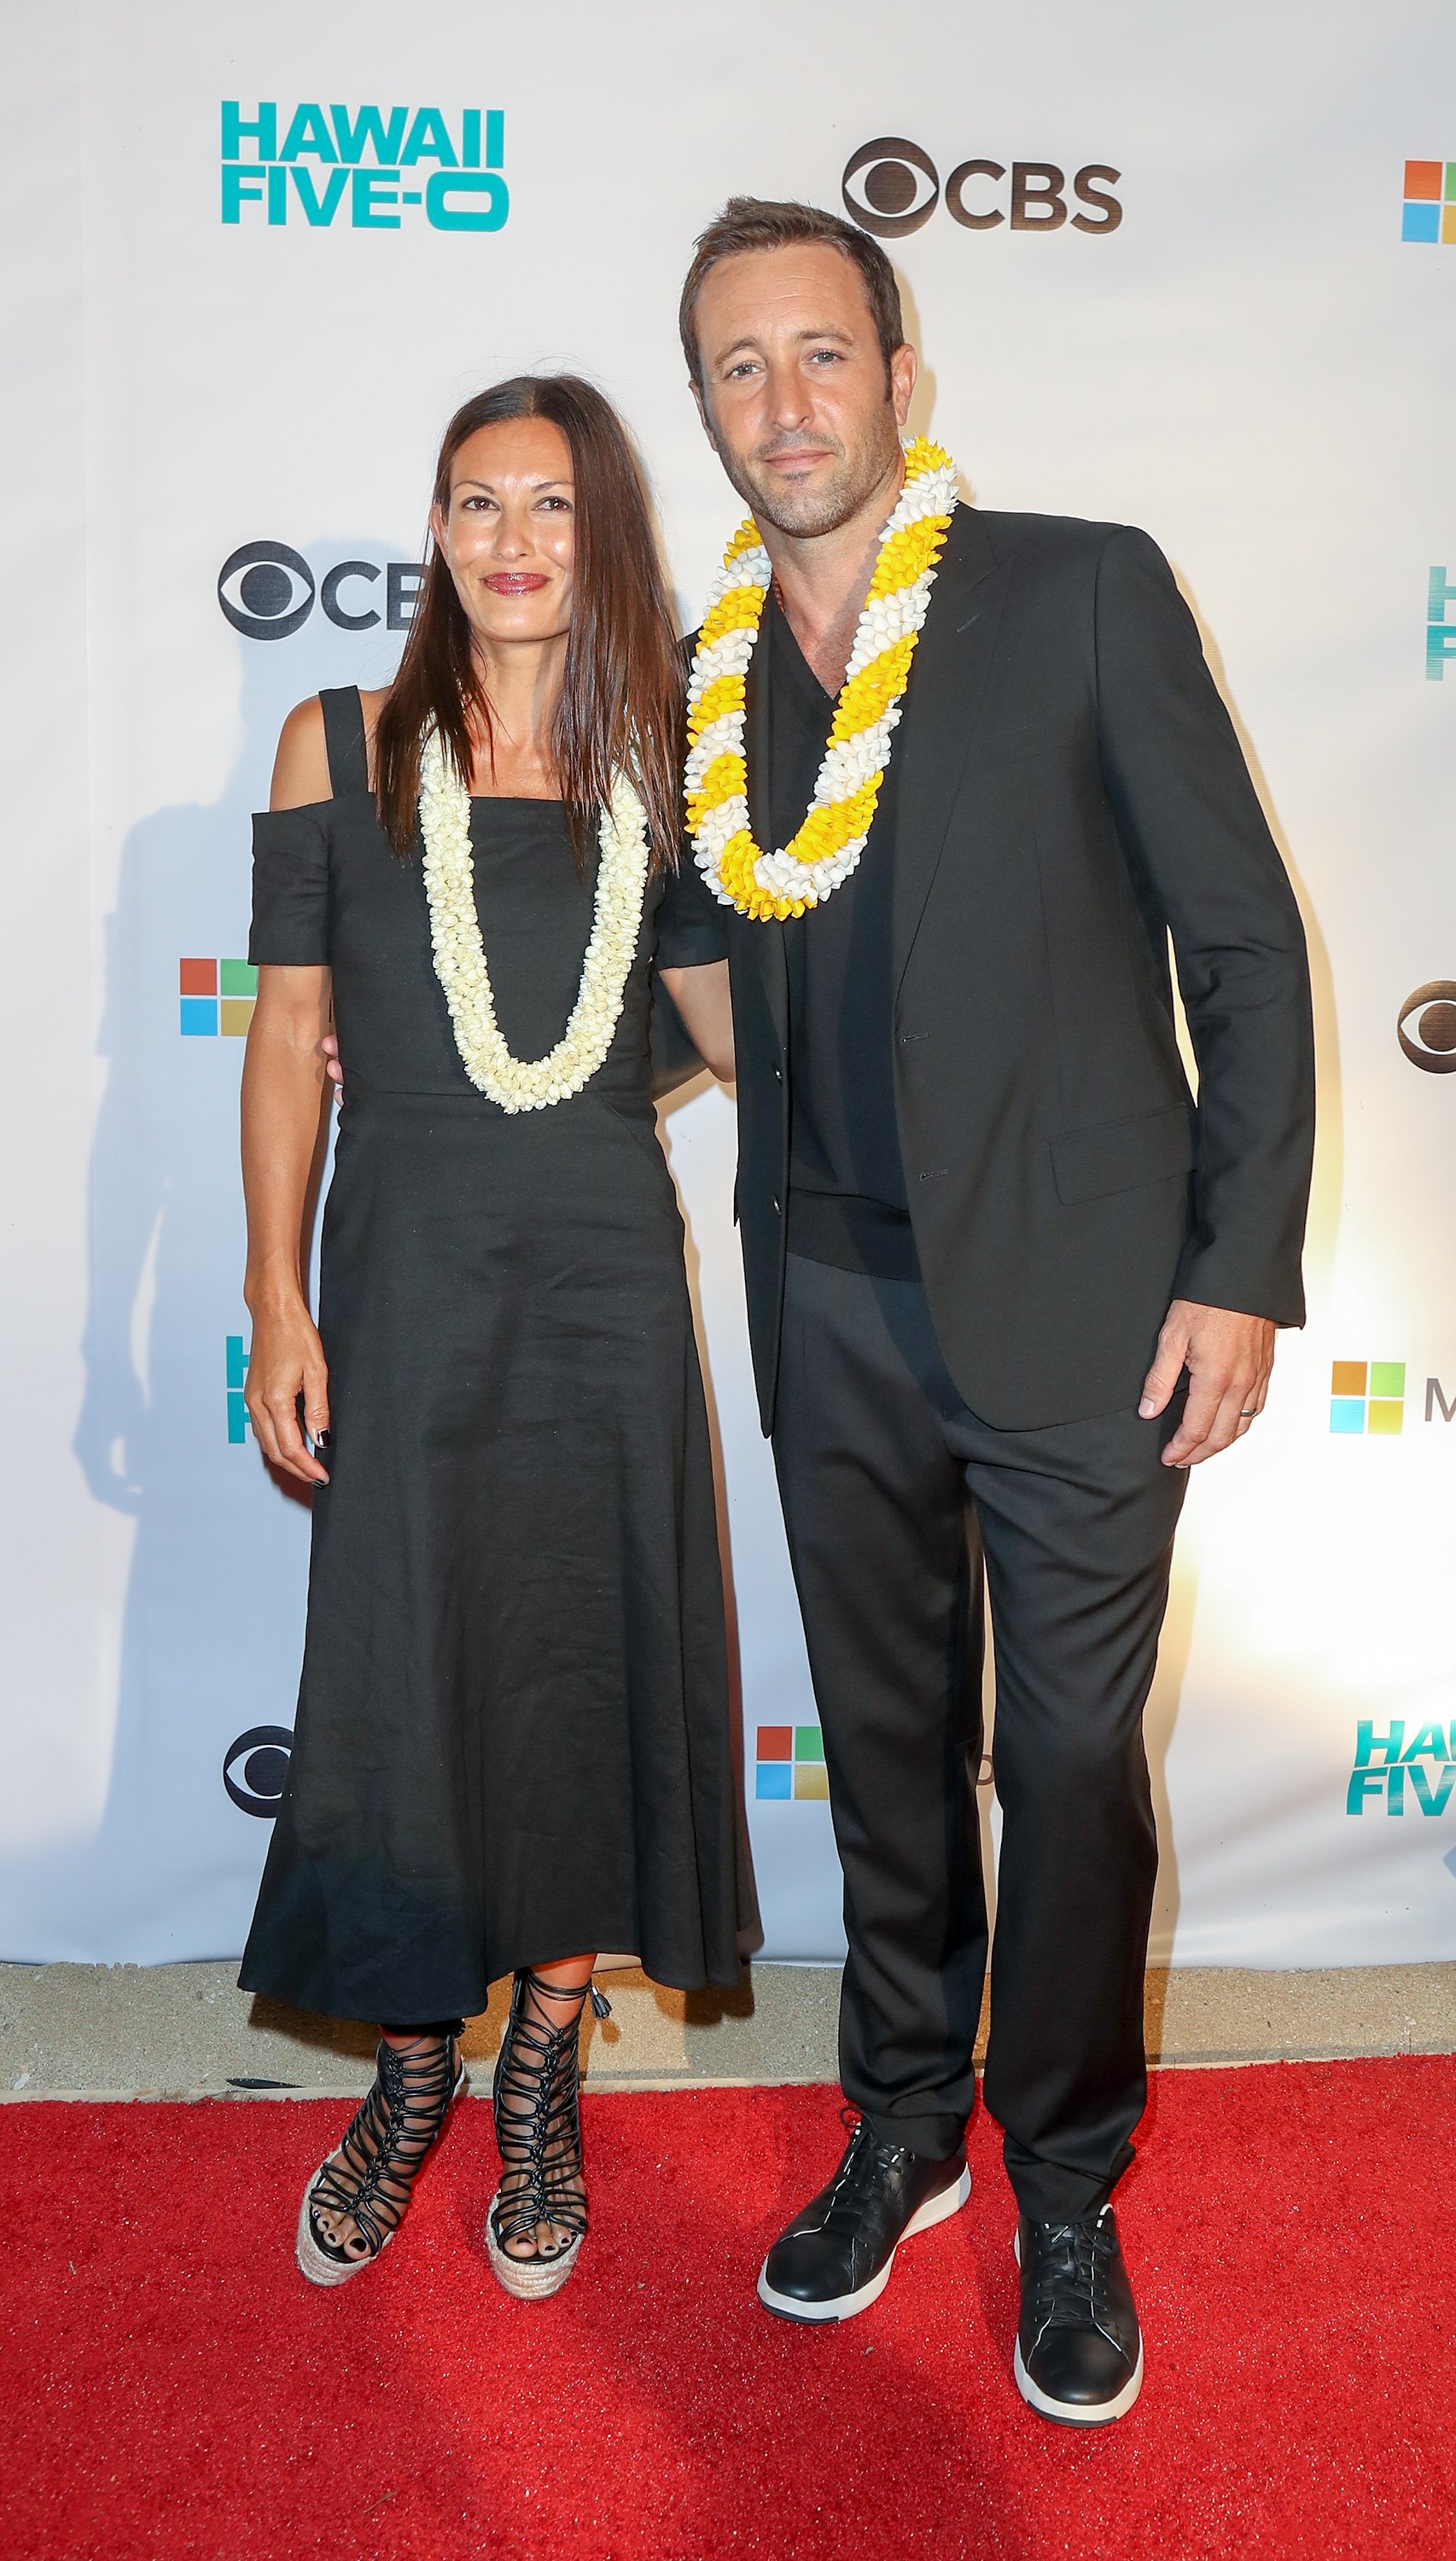 Alex and Malia at the “Hawaii Five-O” season 7 Premier Event on September 23, 2016 | Source: Getty Images